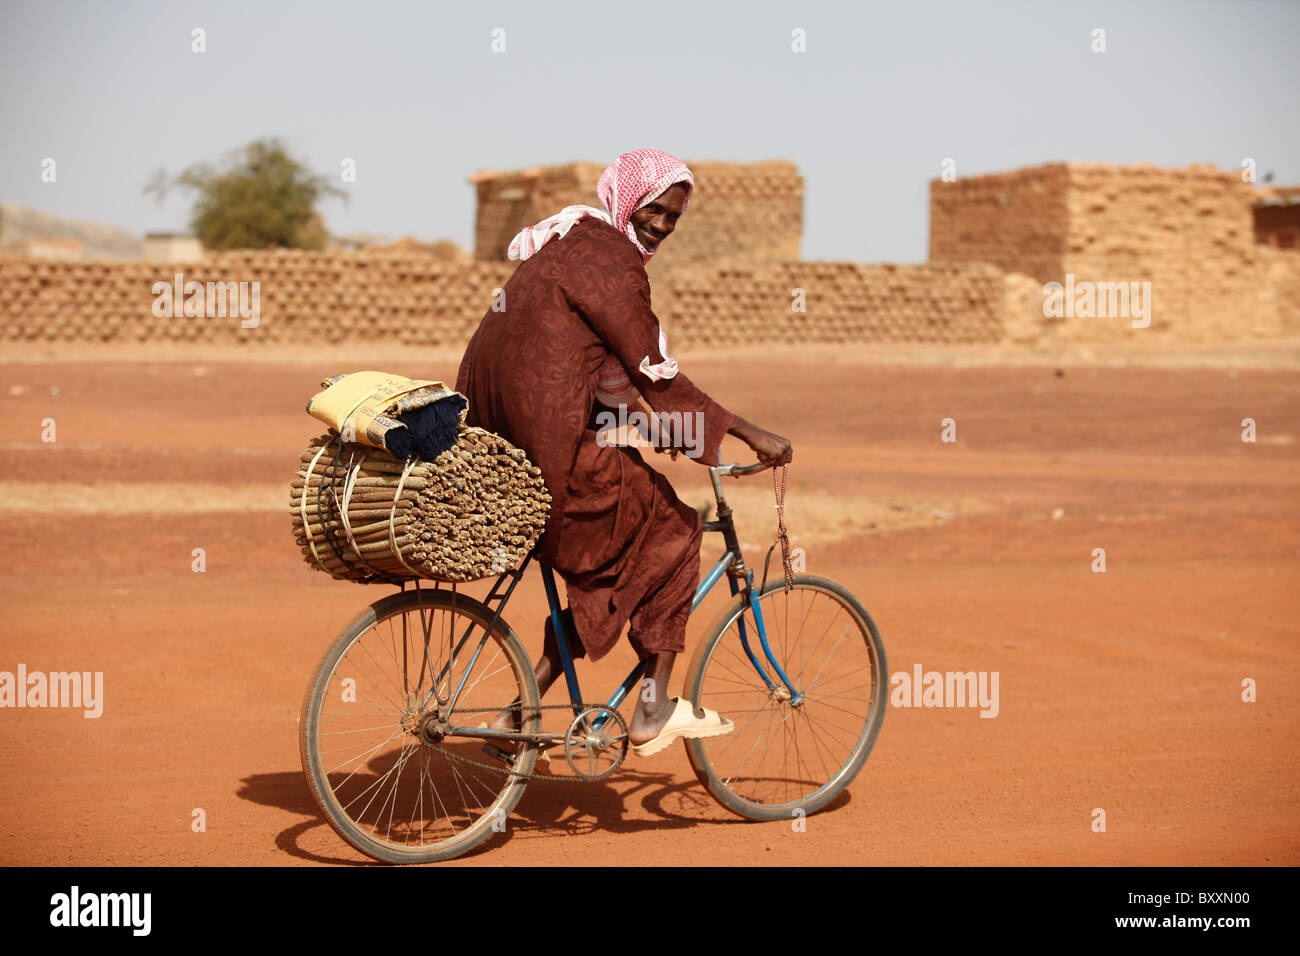 A man rides through the town of Djibo, Burkina Faso with harvested millet on his bicycle. Stock Photo